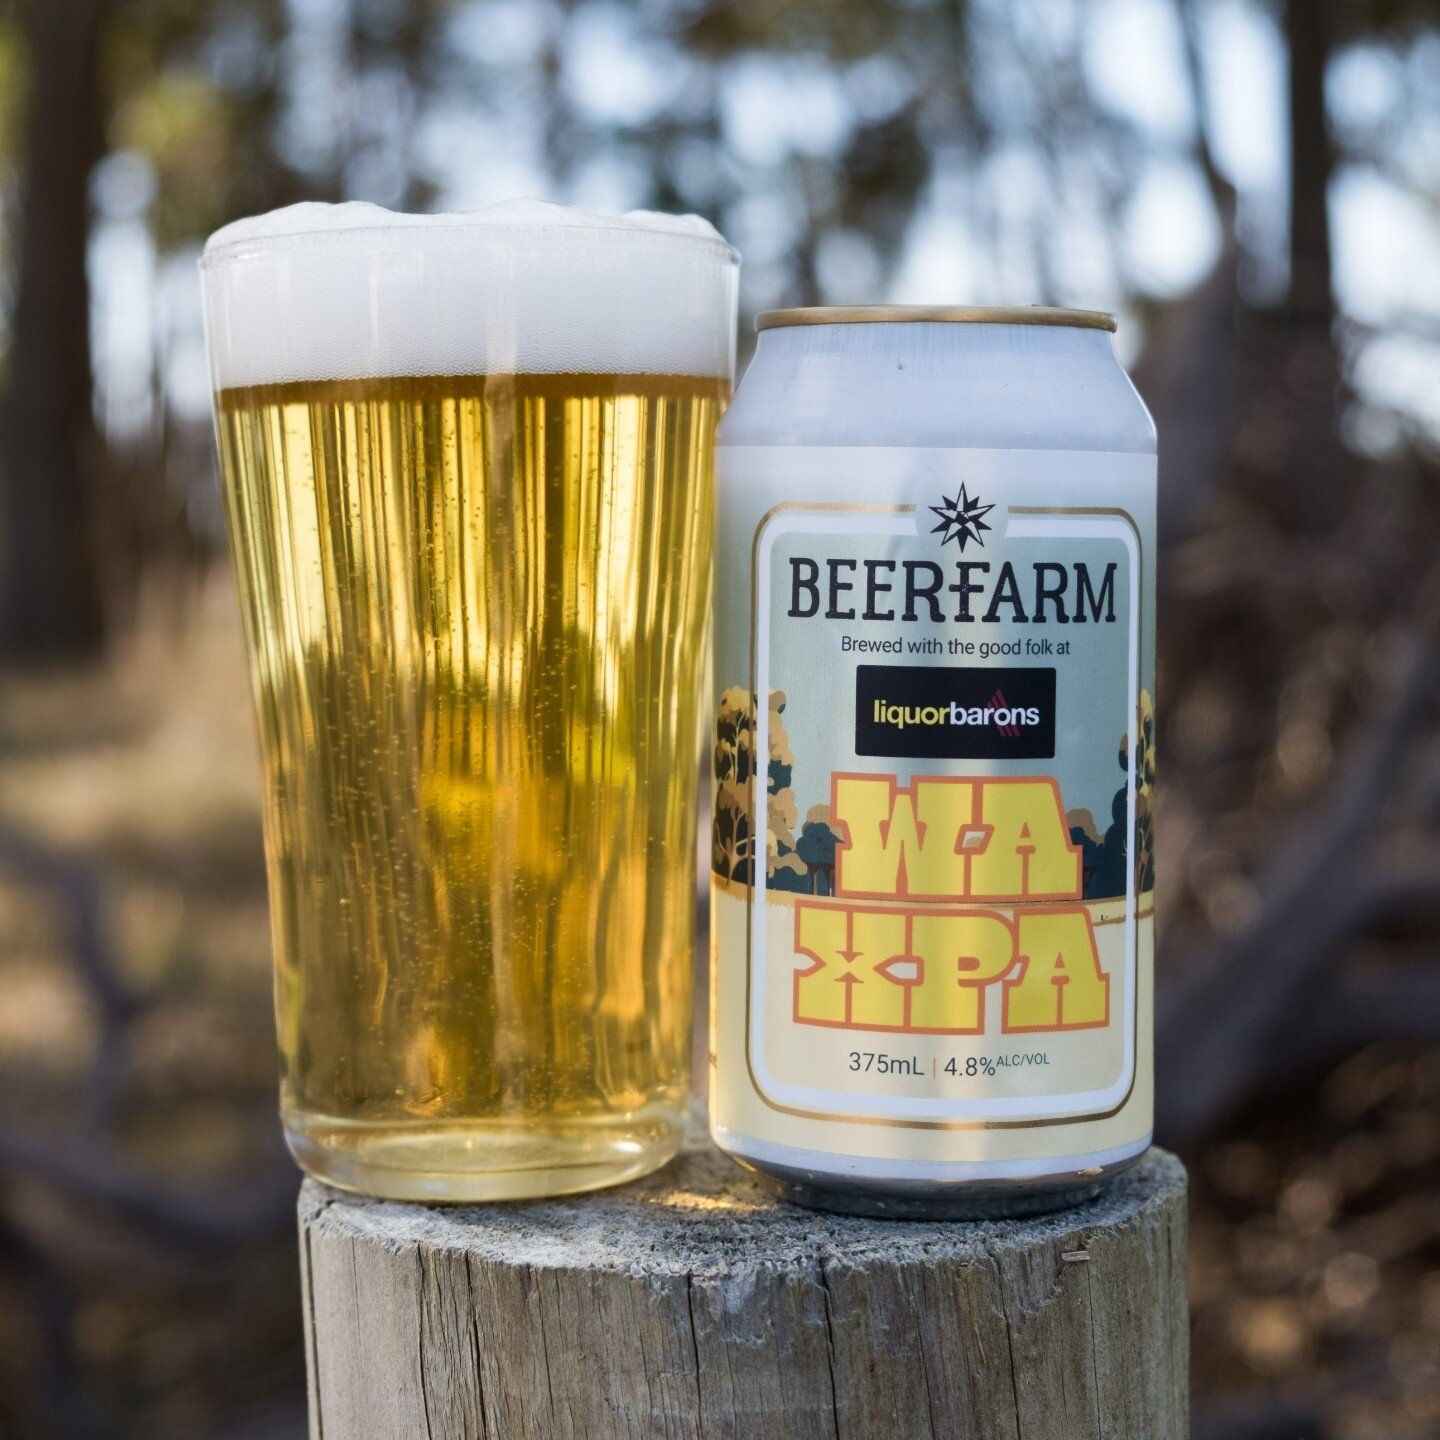 We teamed up with our local, independent mates at Beerfarm to brew 100% West Aussie beer, just in time for WA Day...🍻 WA XPA is packed with hand-picked hops from Karridale Cottages and Hop Farm and celebrates our great state at its best! 

Get a tas